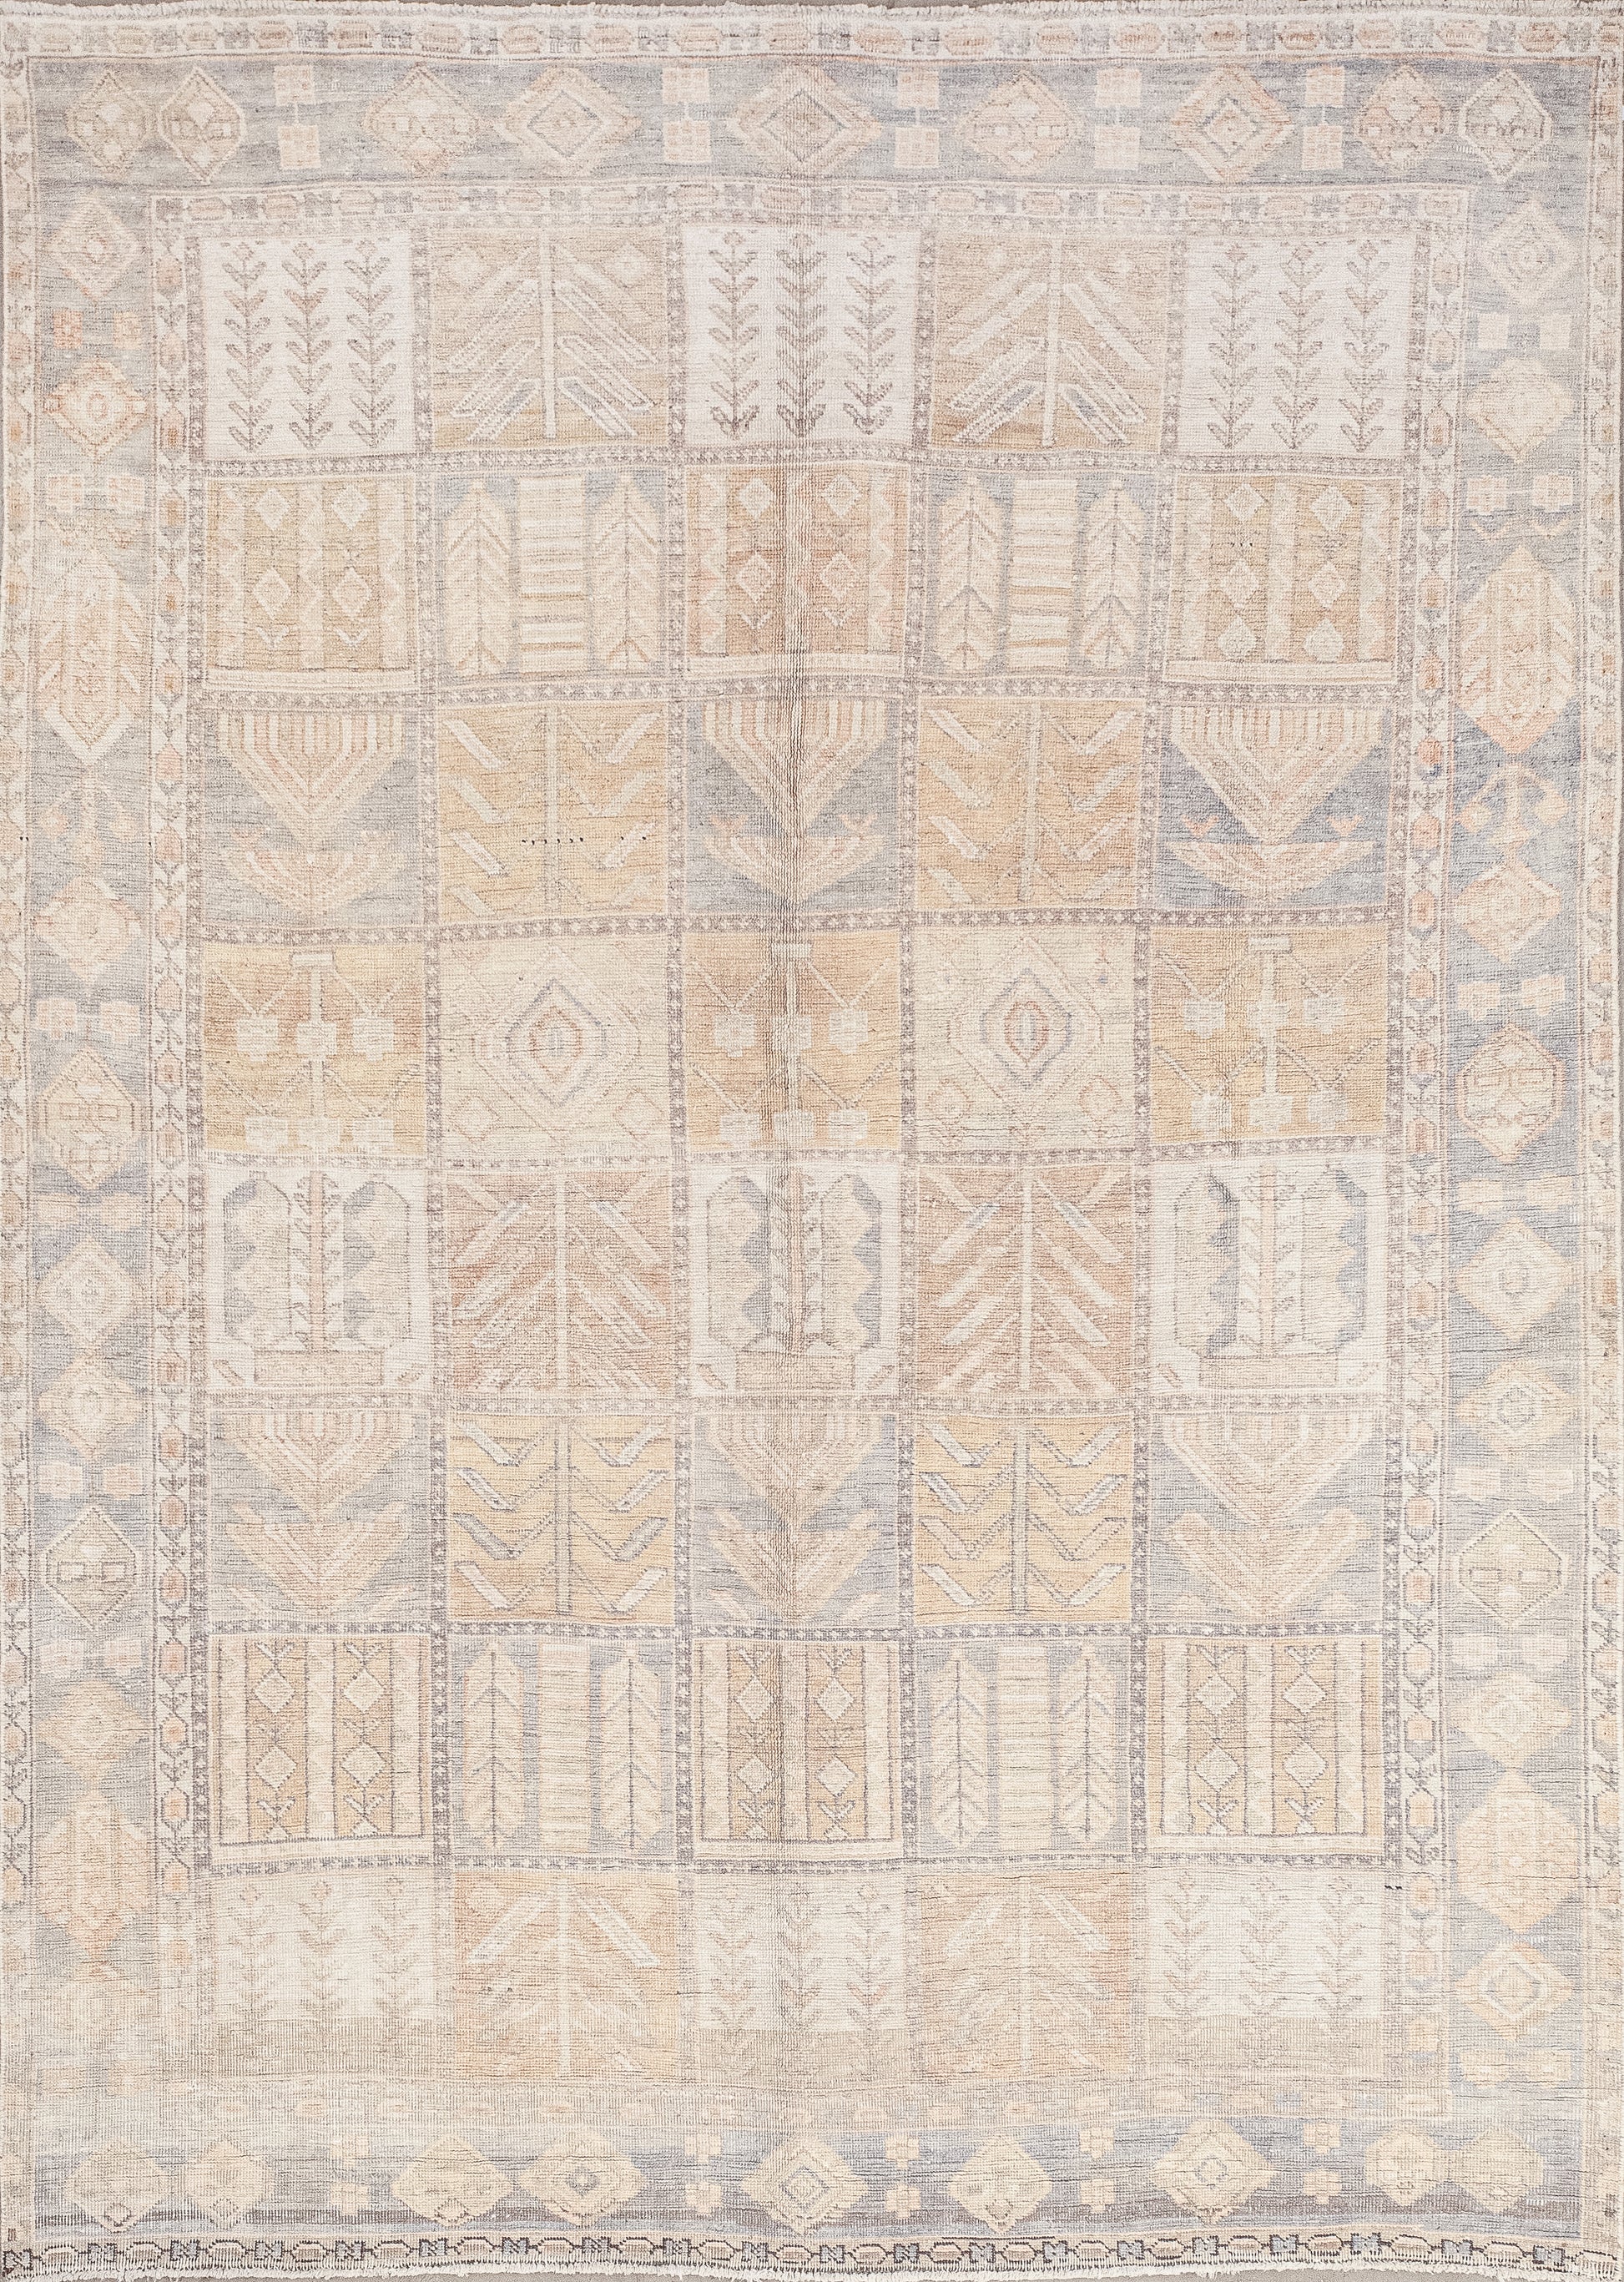 This beautiful carpet was woven to attract ethical behavior and the ability to rise above any problem. It could be great for a consulting office. The calm color palette comes in light brown, gray and beige. 